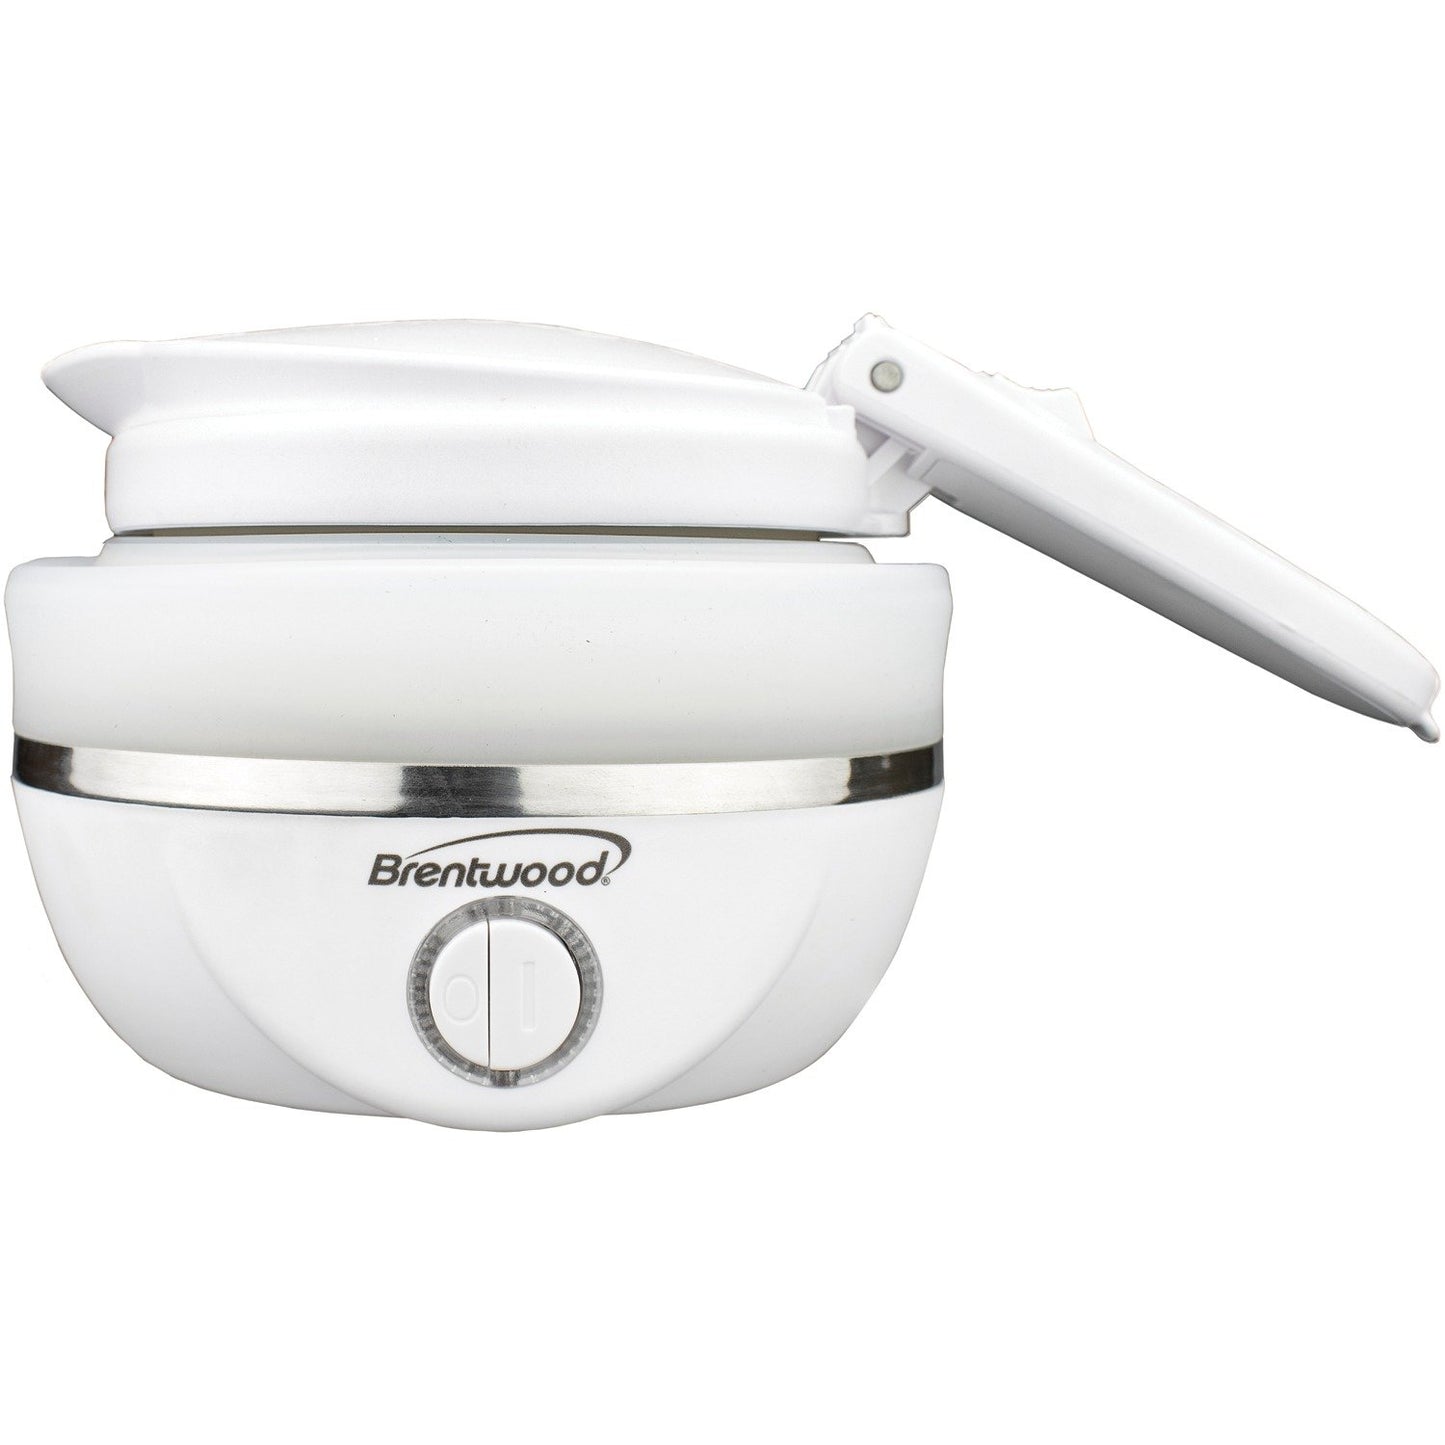 Brentwood Appl. KT-1508W .85Q Dual-Voltage Collapsible Travel Kettle (White)